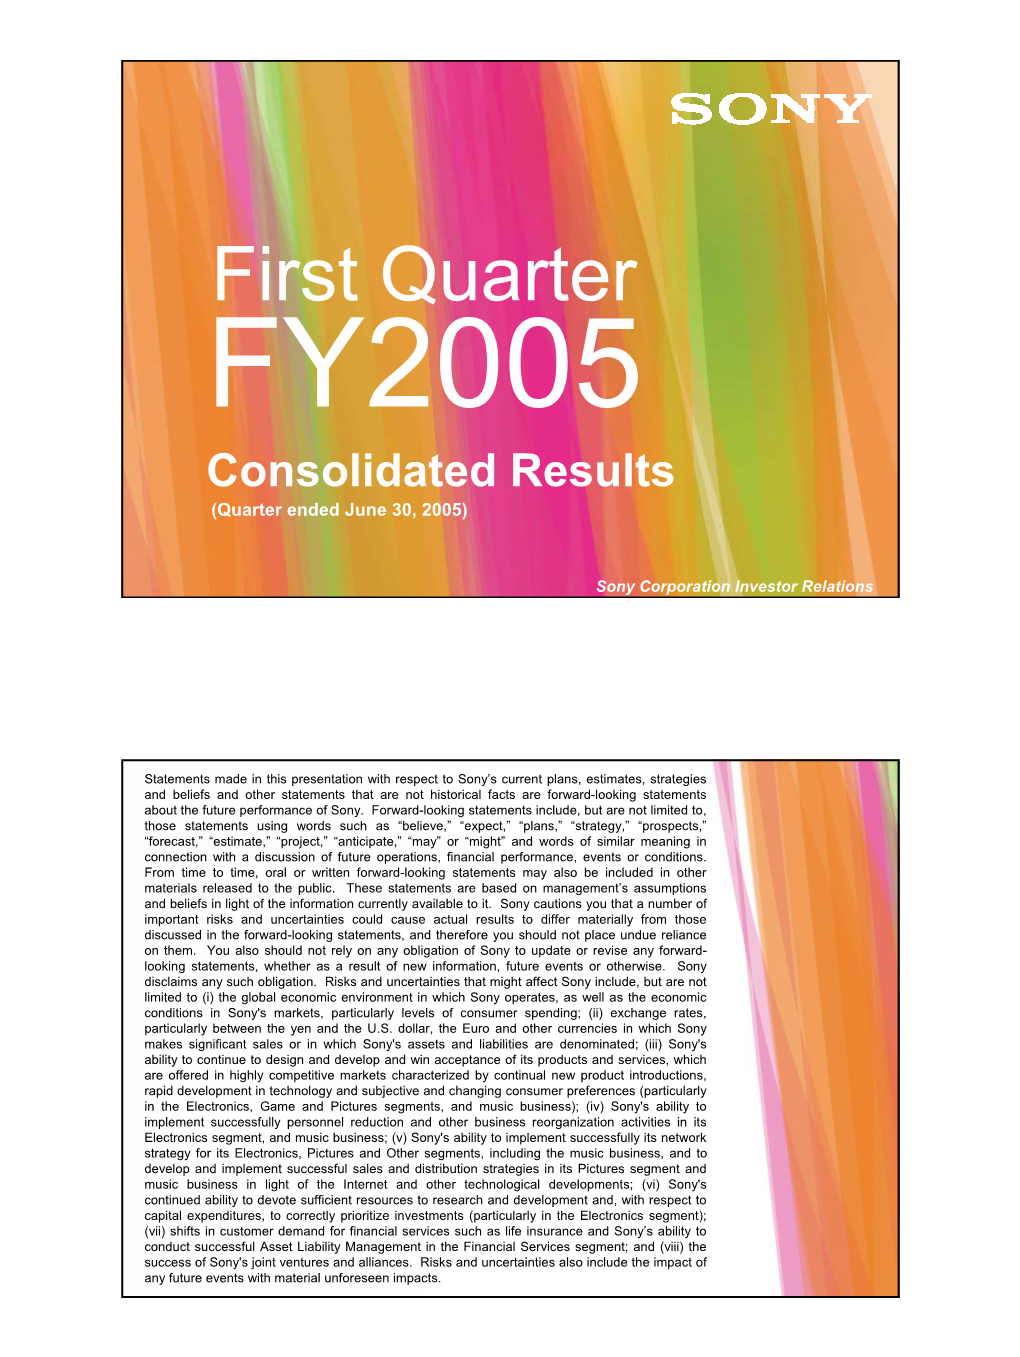 FY2005 Consolidated Results (Quarter Ended June 30, 2005) Sony Corporation Investor Relations